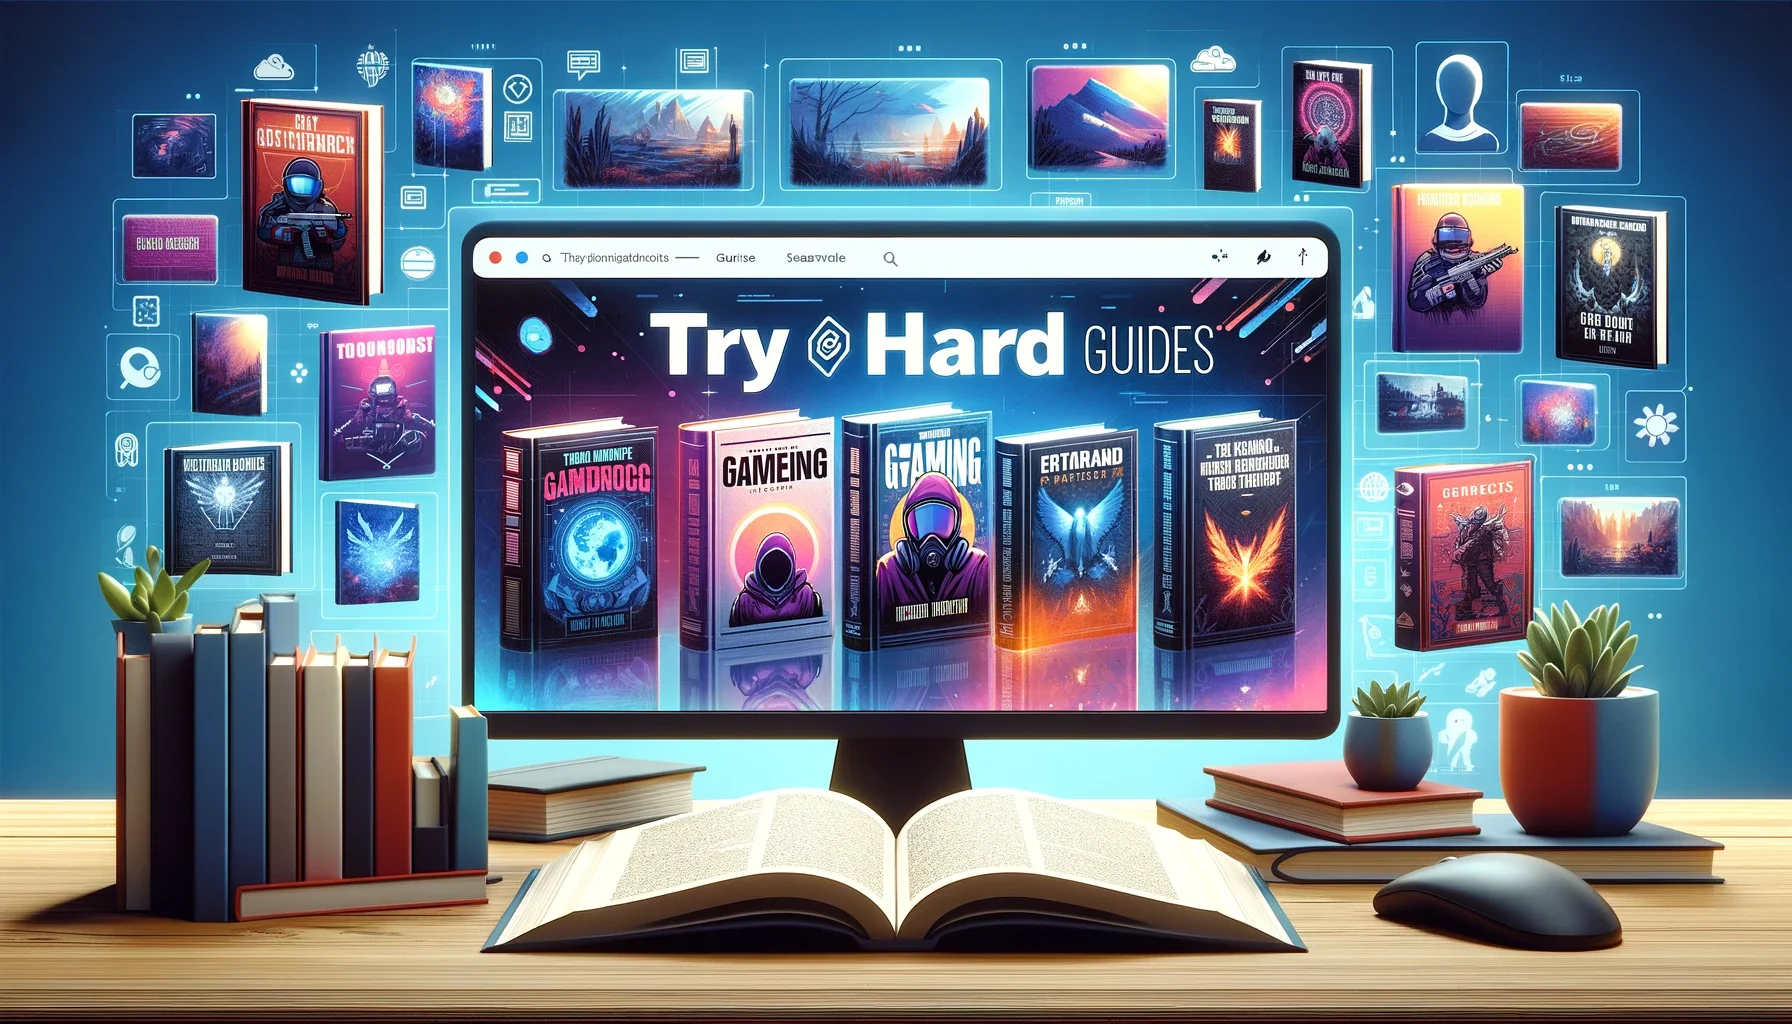 Try Hard Wordle vs Try Hard Guides: A Comparative Insight into Gaming Resources